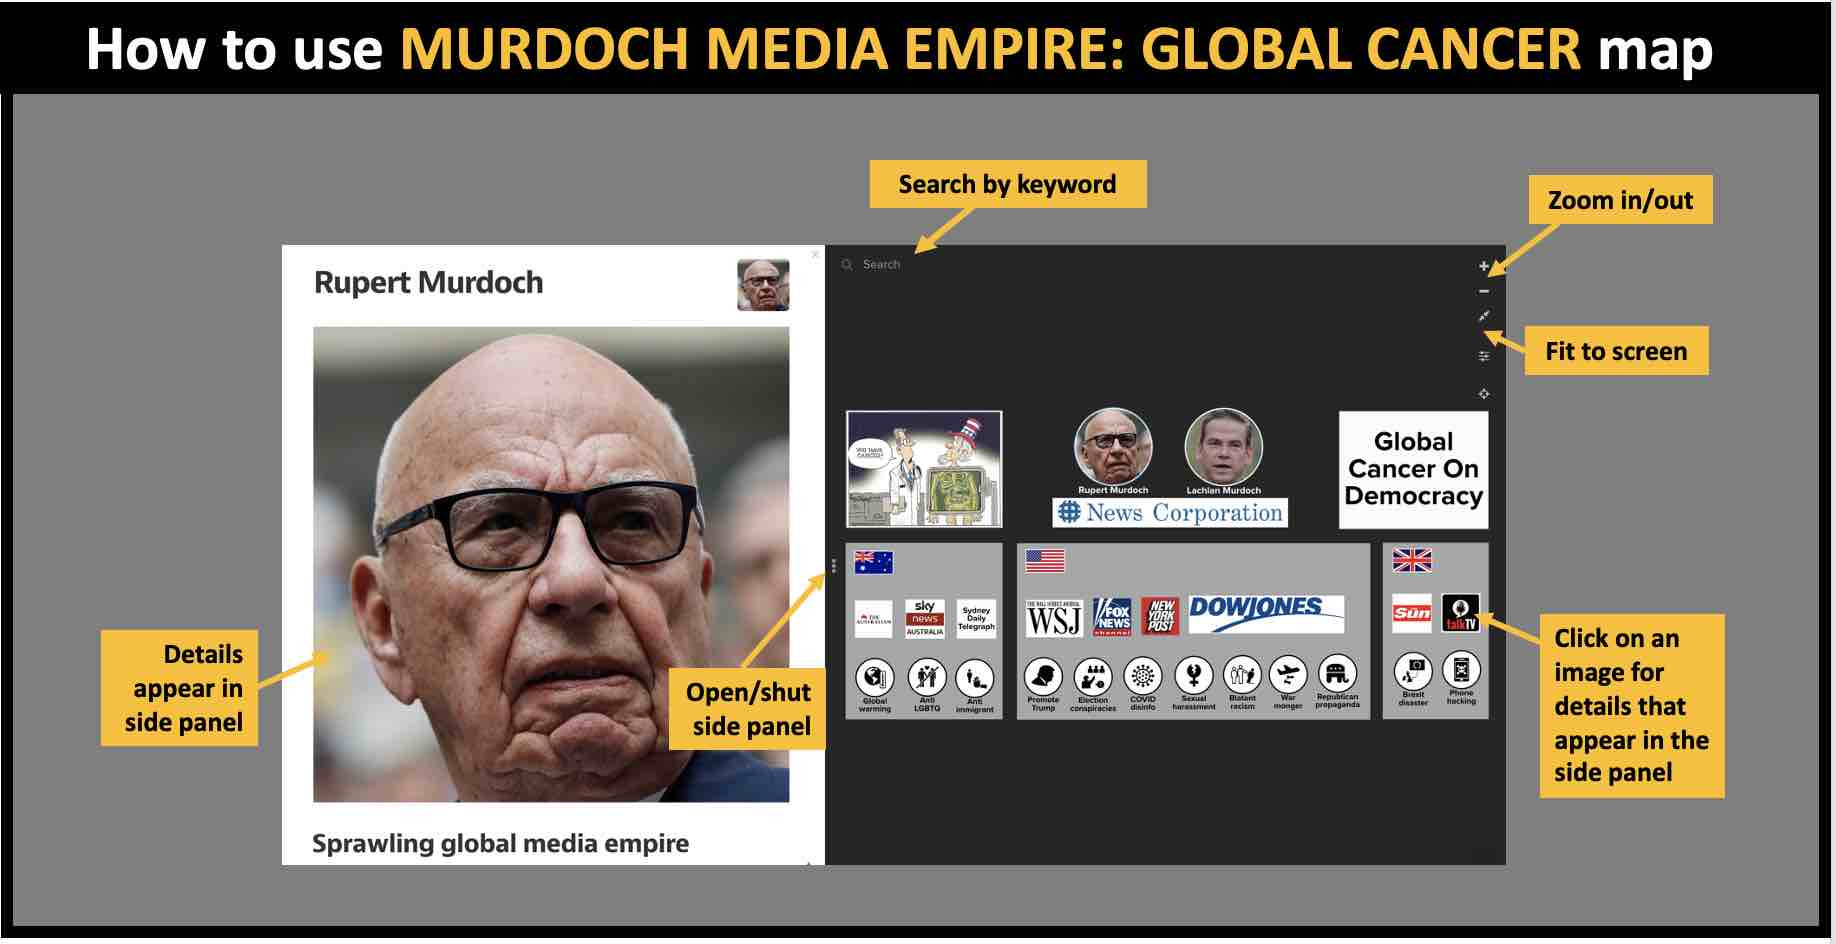 How to use the Murdoch Media Empire is a global cancer on democracy.